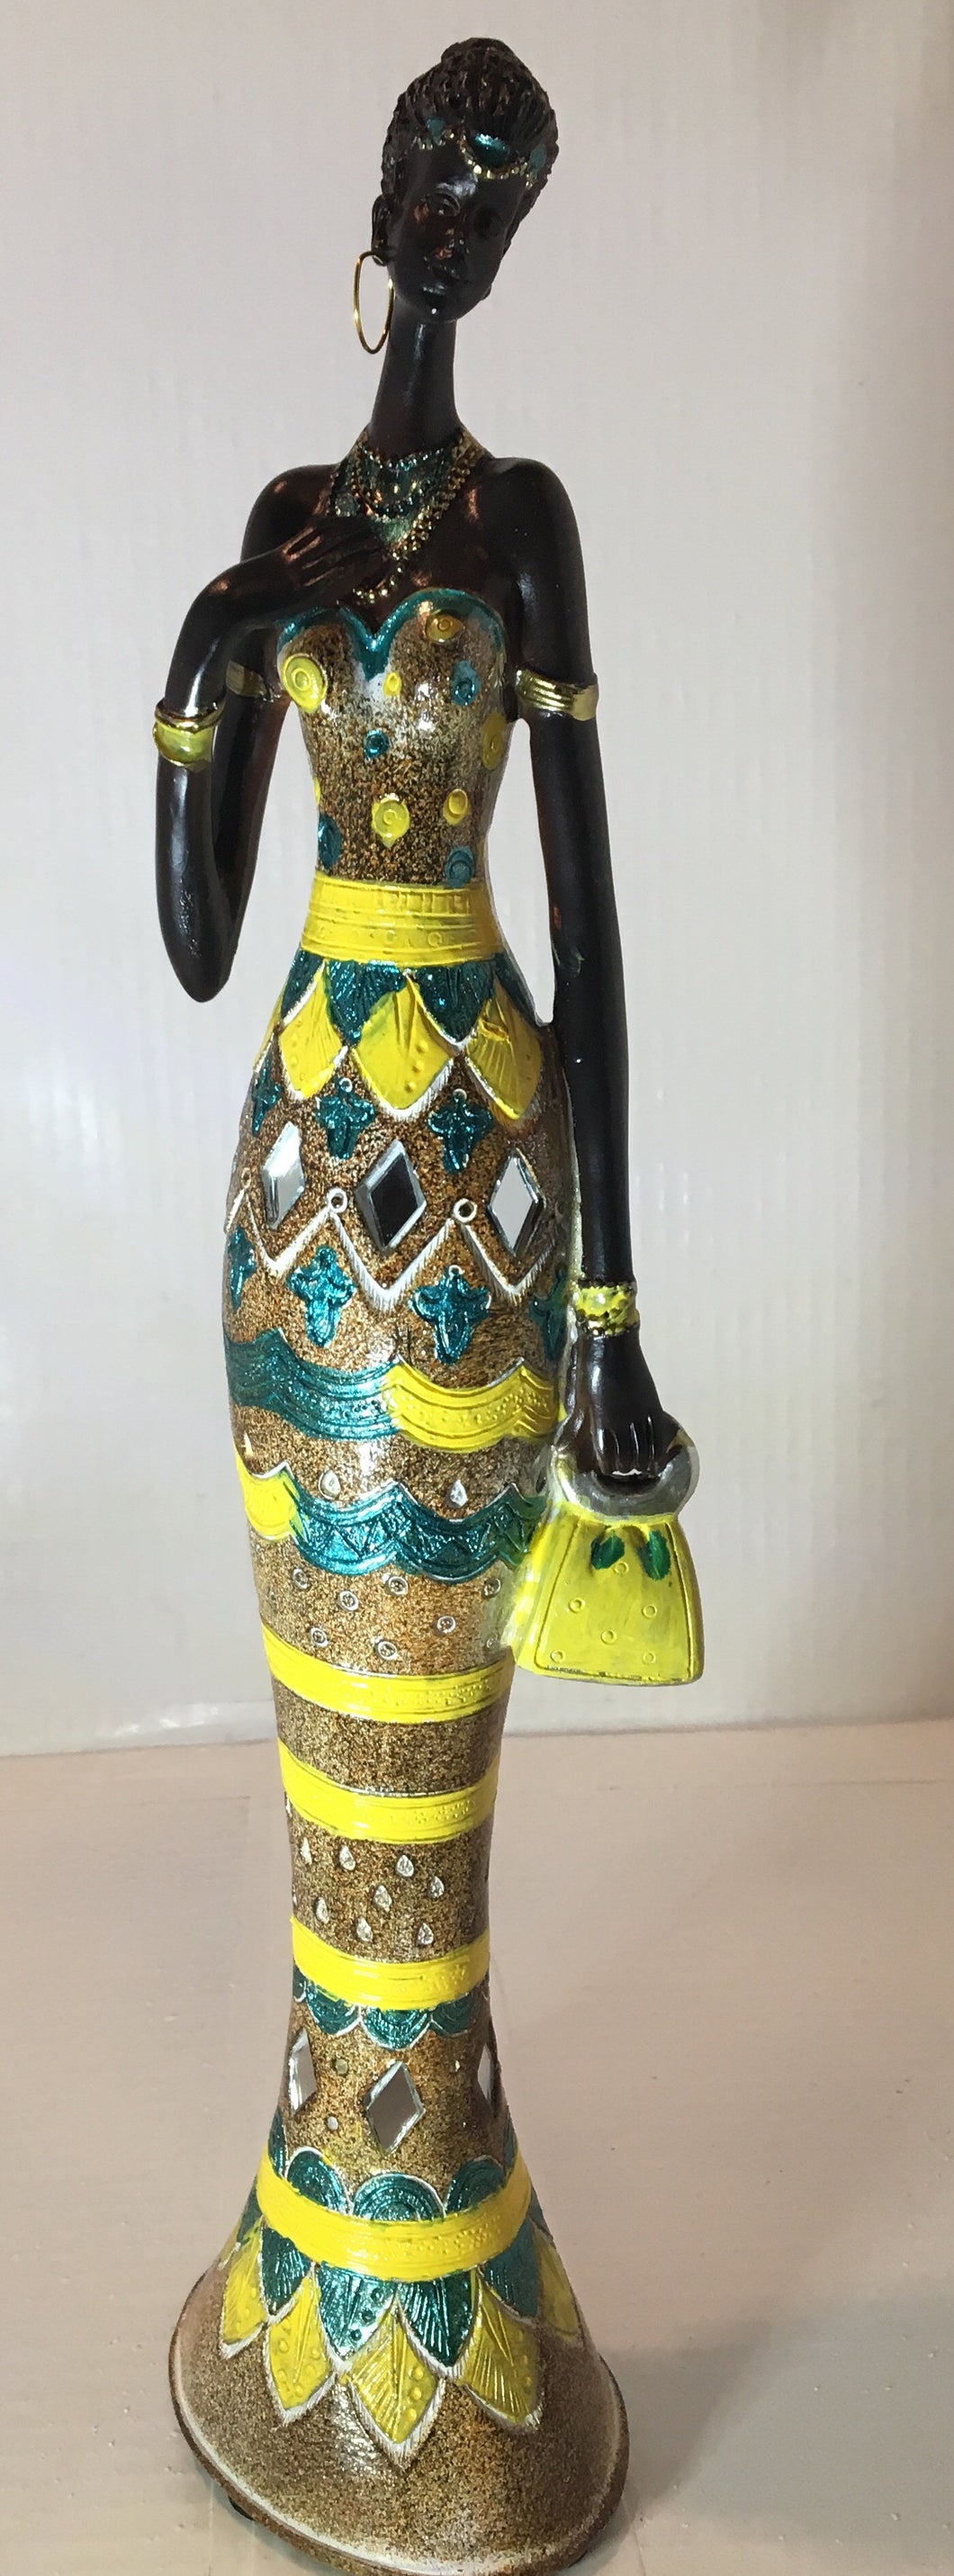 SARA- frican Lady w/ Yellow and Turquoise